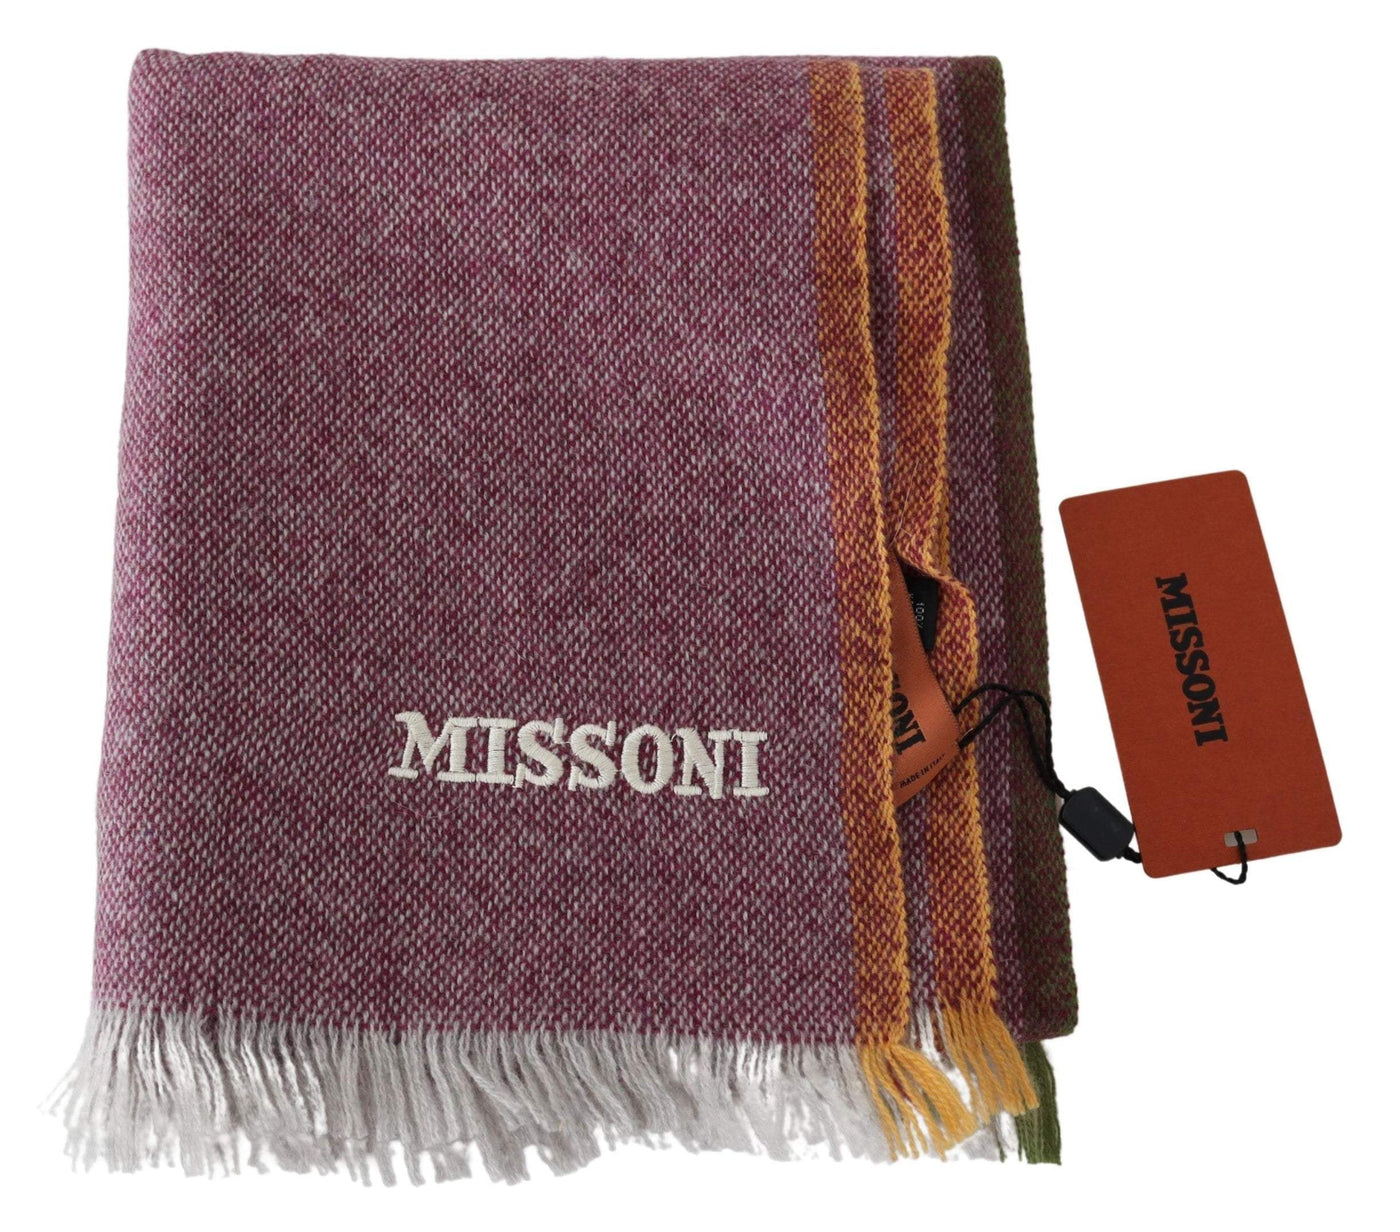 Missoni Maroon 100% Cashmere Unisex Wrap  Scarf #men, Accessories - New Arrivals, feed-agegroup-adult, feed-color-marrone, feed-gender-male, Marrone, Missoni, Scarves - Men - Accessories at SEYMAYKA